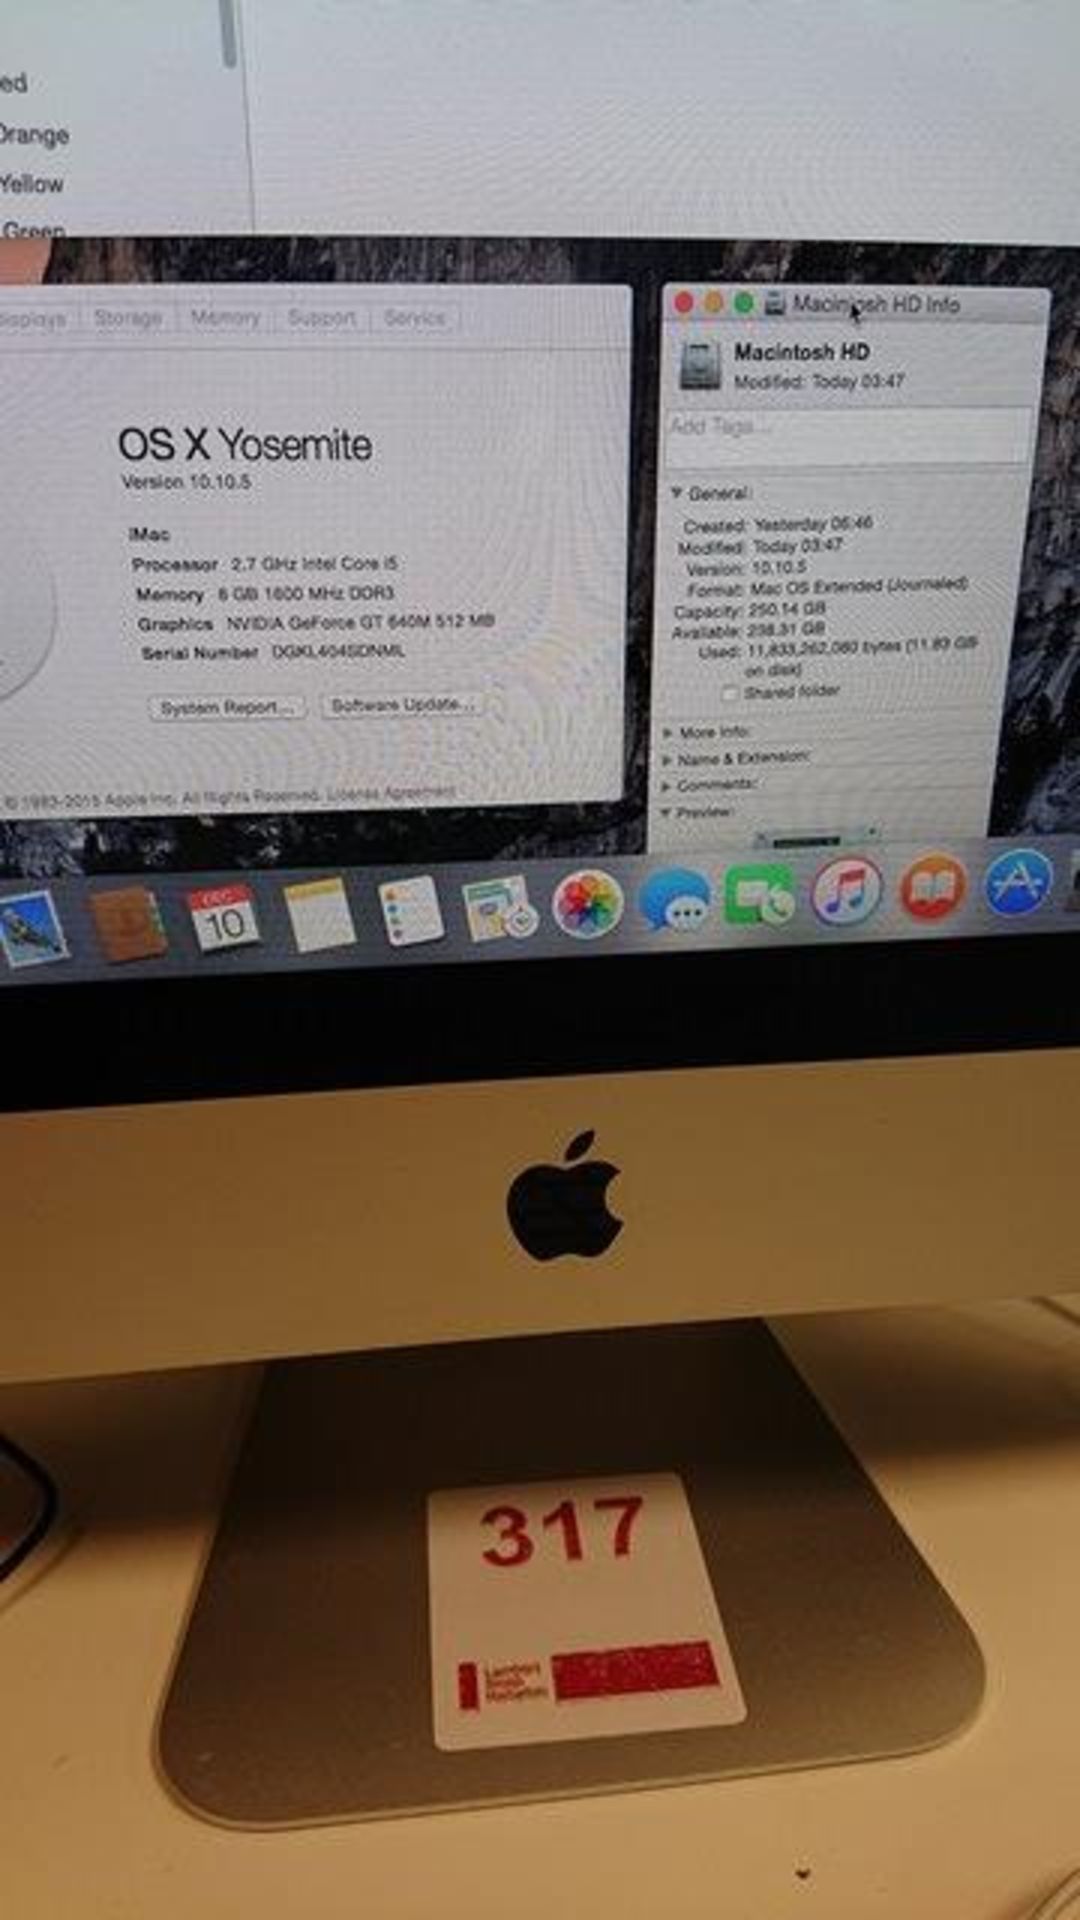 iMac 21.5" 2.7 GHz Intel Core i5 8Gb RAM 250Gb HD PC serial number DGKL404SDNML - Image 2 of 3